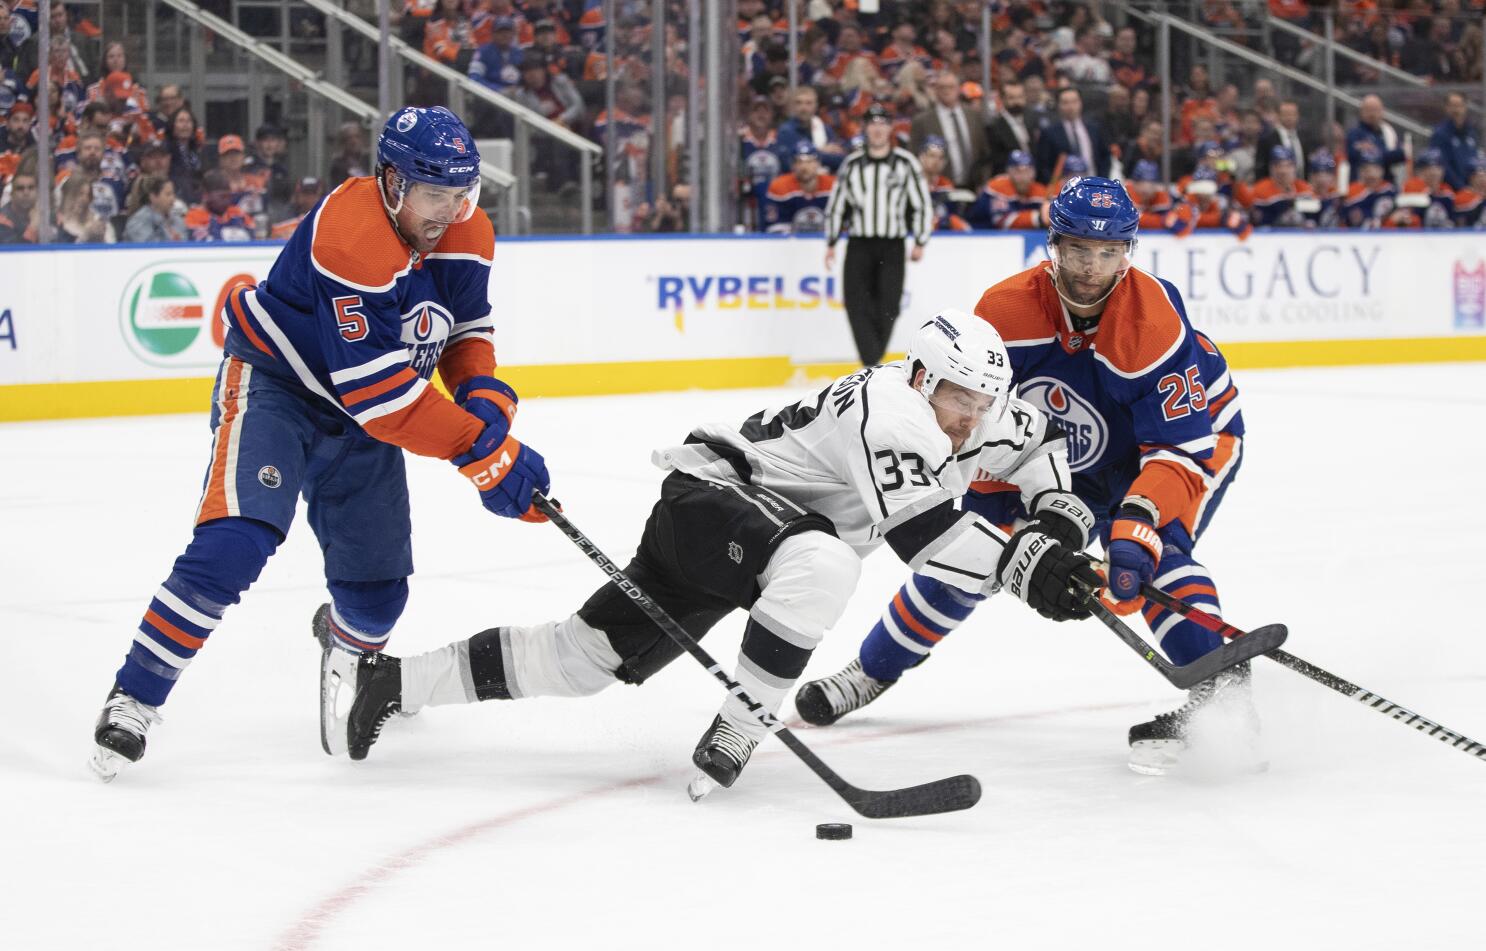 Cam 'N' Eggs: The Oilers and Kings renew their playoff rivalry